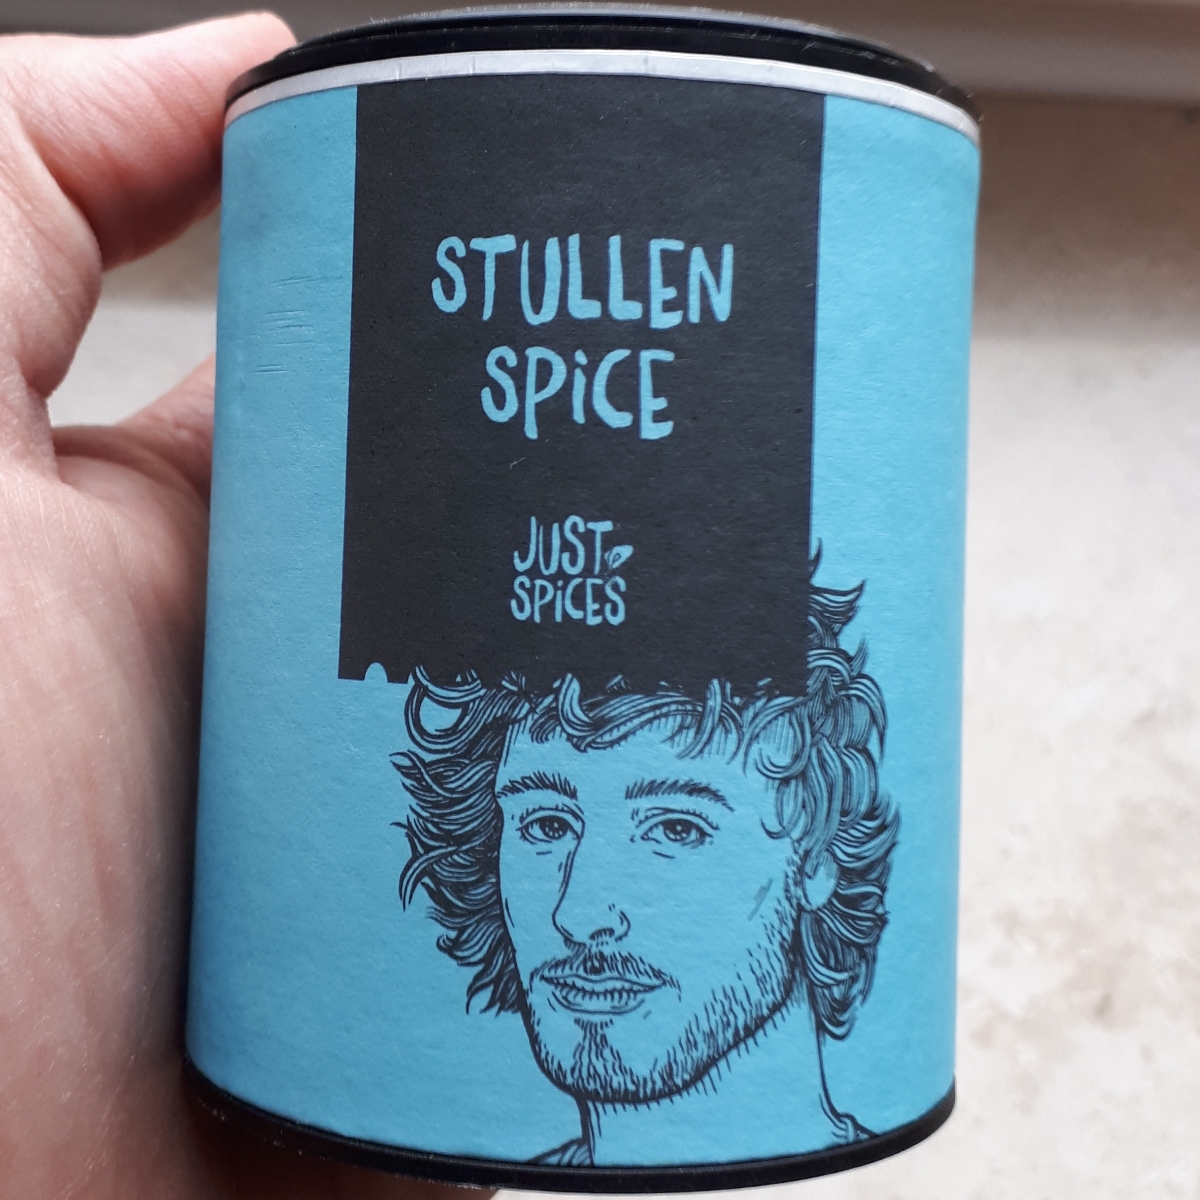 Just Spices Stullen Spice Reviews